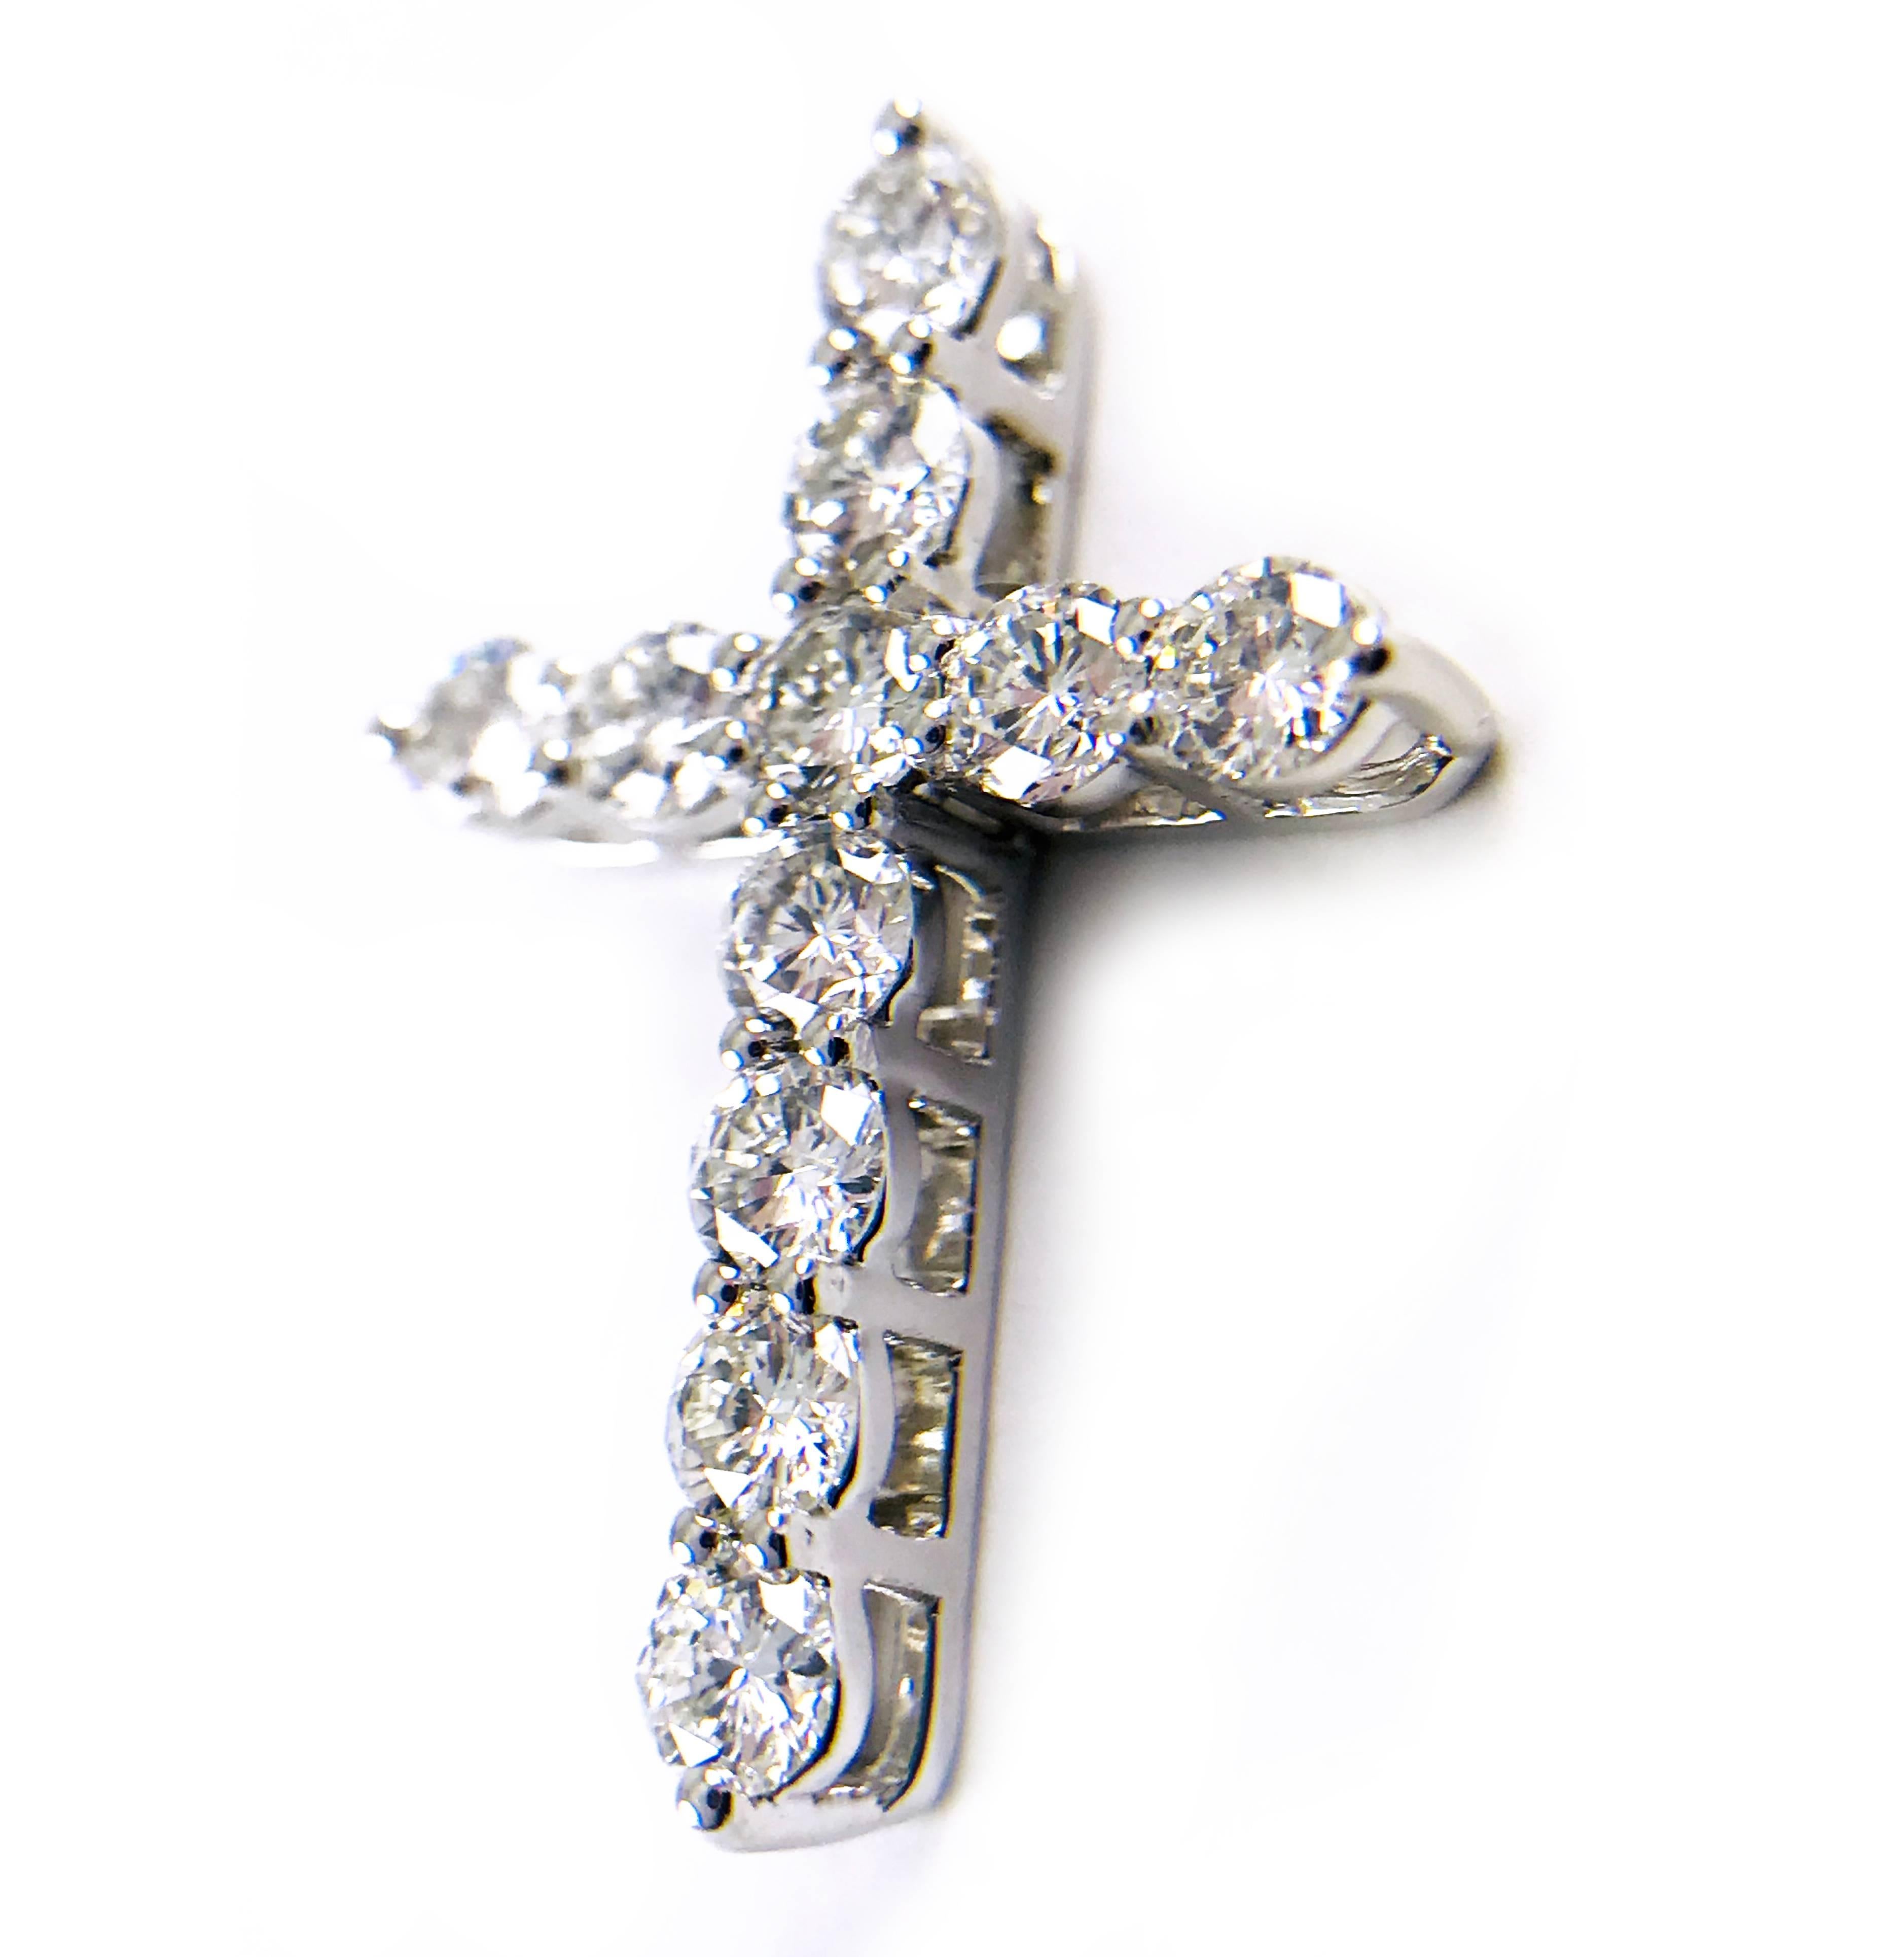 New 14k white gold diamond cross pendant adorned with eleven round brilliant cut diamonds. The diamonds are prong-set in basket-style mountings that allow light to flow through the diamonds for ultimate sparkle and brilliance. Diamonds are VS1 in